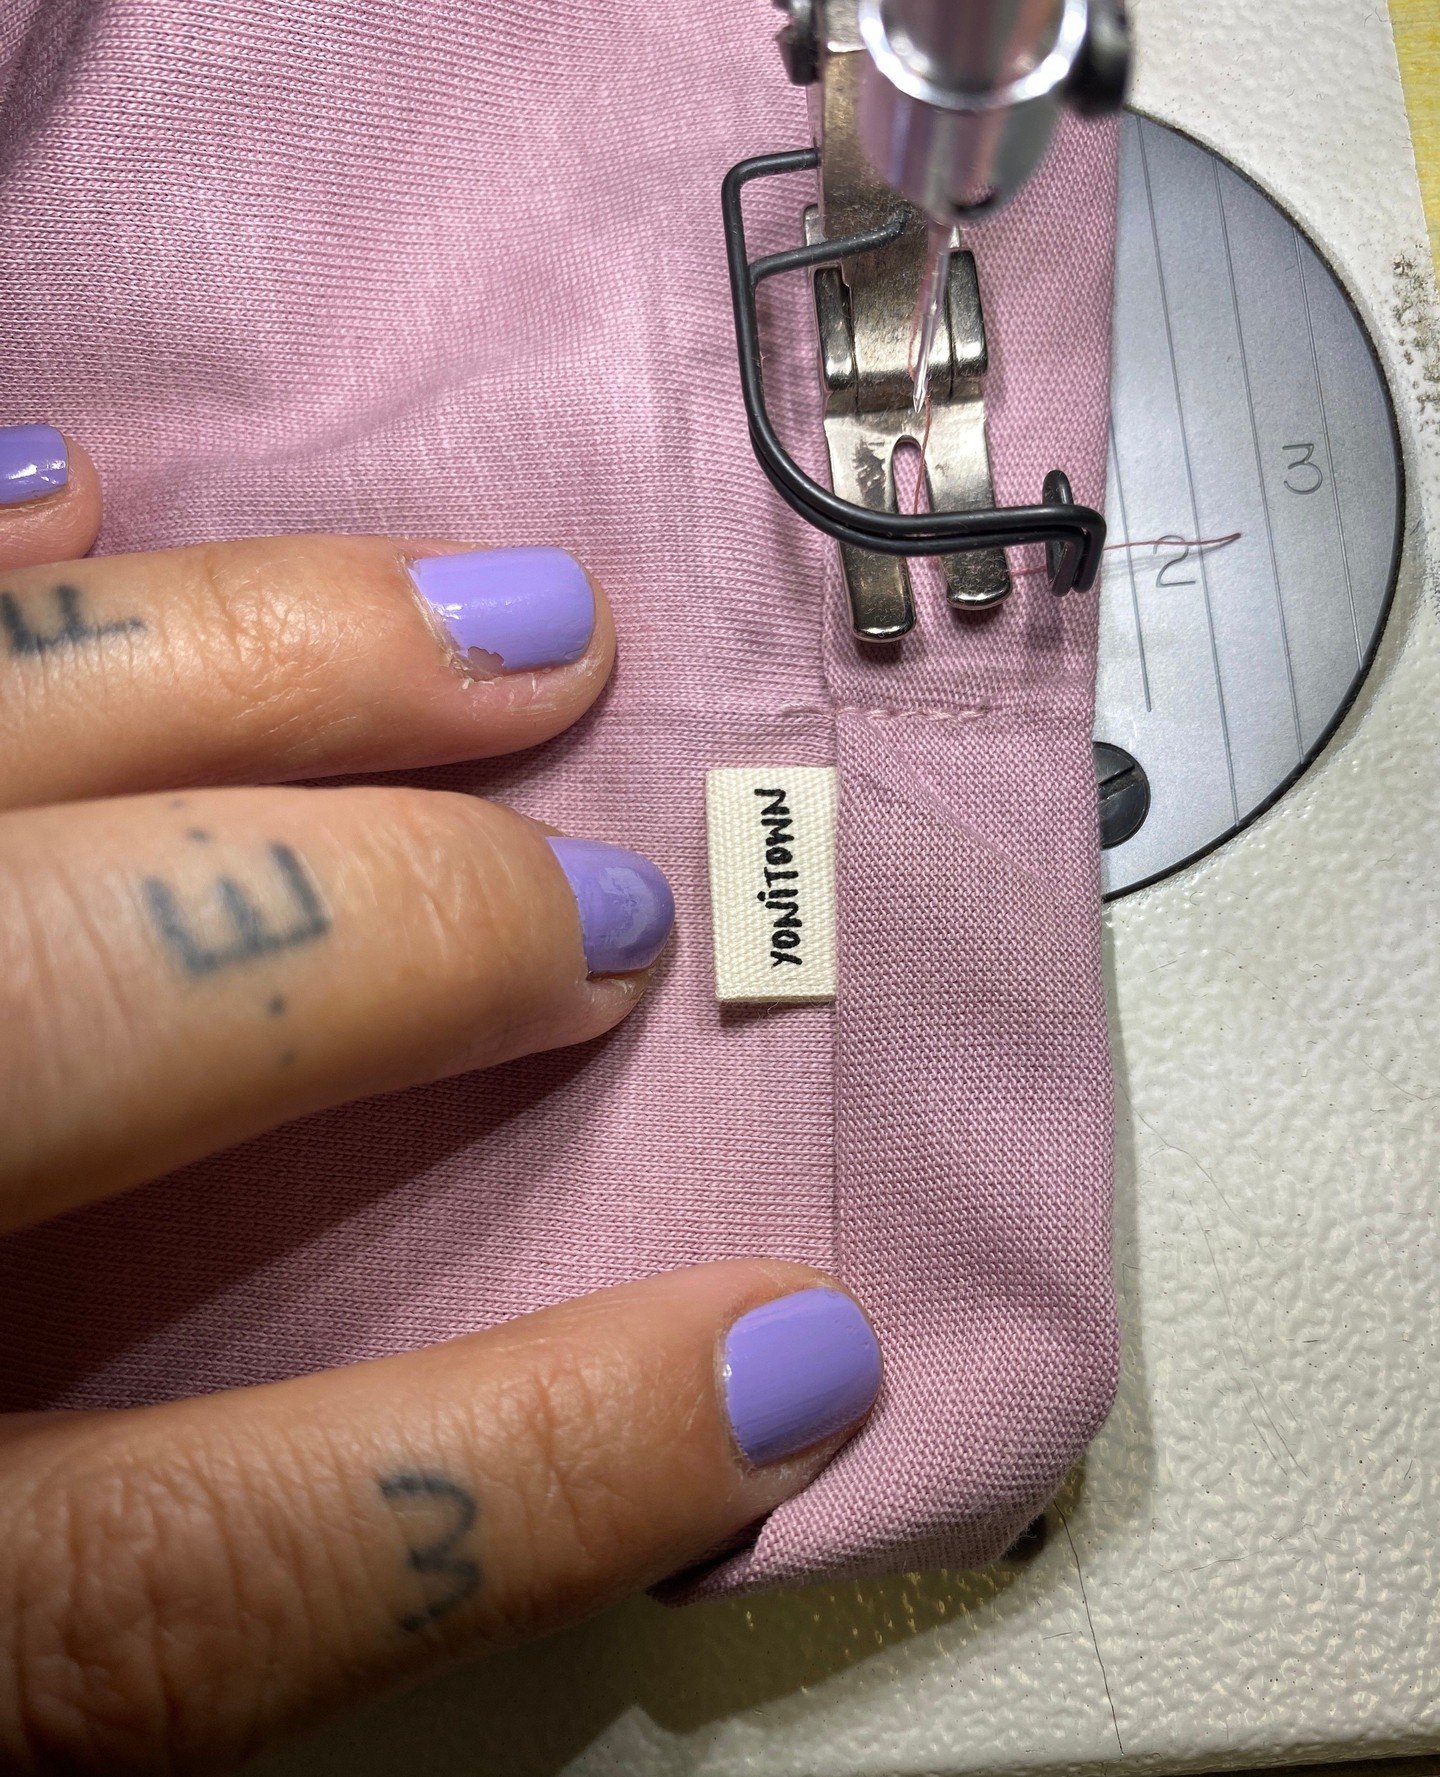 Lavender tones captured at the studio 💜⁠
⁠
1 Sewing our tiny labels on the sleeve of the Golden Vulva Heart crop top.⁠
2 Printing Thirdie on the back of the Oversized tee.⁠
3 Back pattern piece of Yoni Undies are being printed.⁠
⁠
Often I get asked 